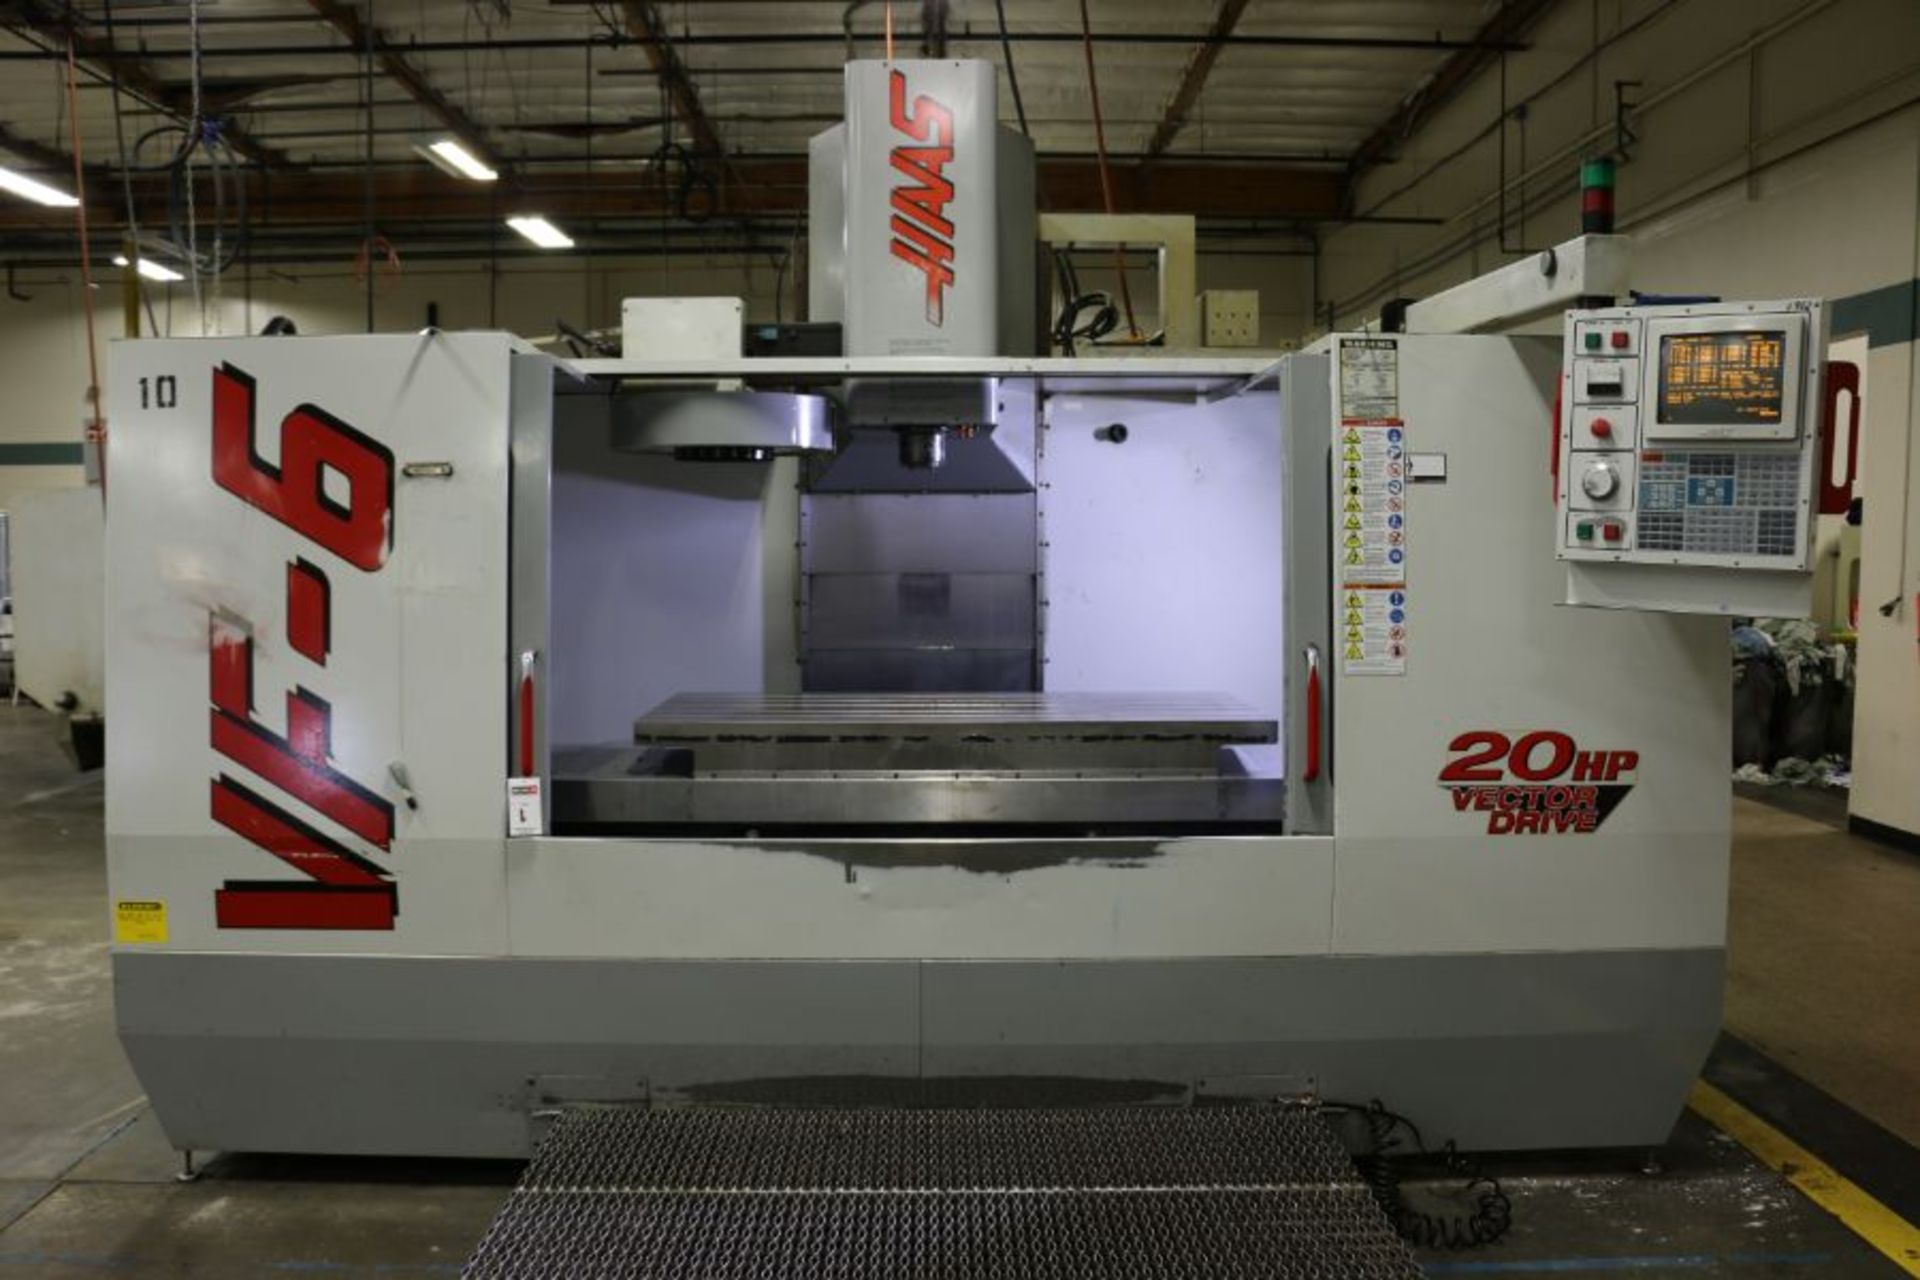 Haas VF-6, 64” x 32” x 30” Travels, 20 Position Tool Carousel, CTS, CT-40 Taper, s/n 12997, New 1998 - Image 4 of 12